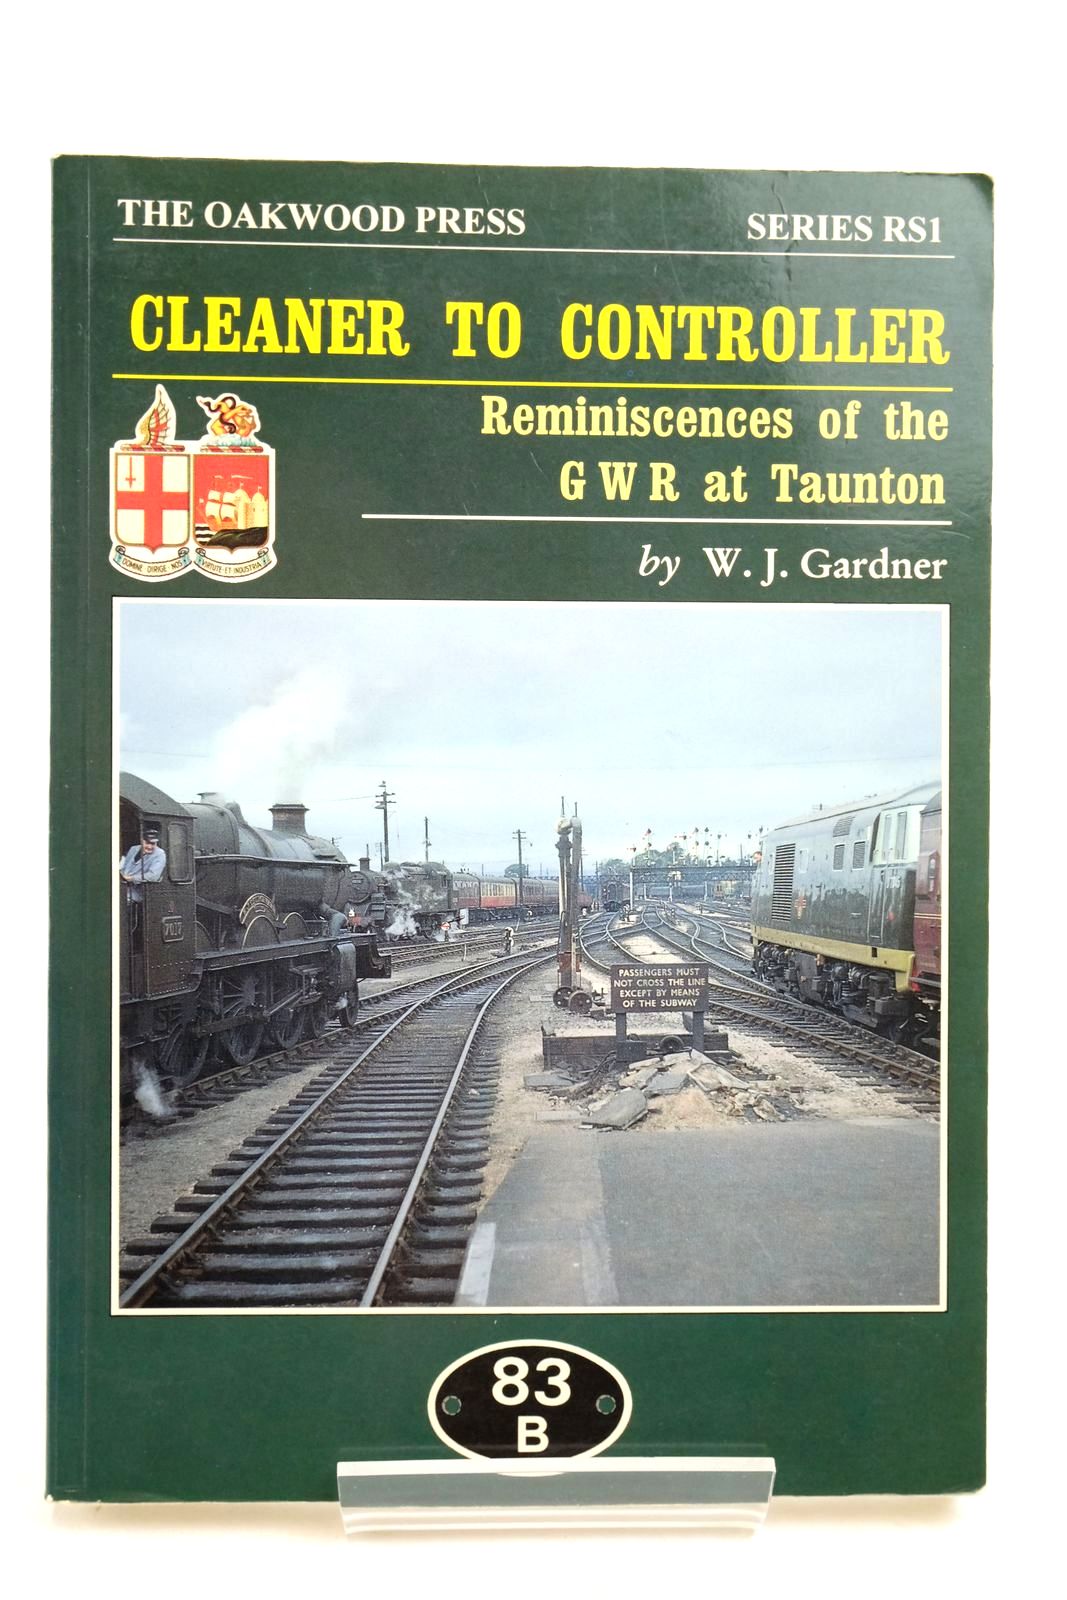 Photo of CLEANER TO CONTROLLER REMINISCENCES OF THE GWR AT TAUNTON written by Gardner, W.J. published by The Oakwood Press (STOCK CODE: 2140801)  for sale by Stella & Rose's Books